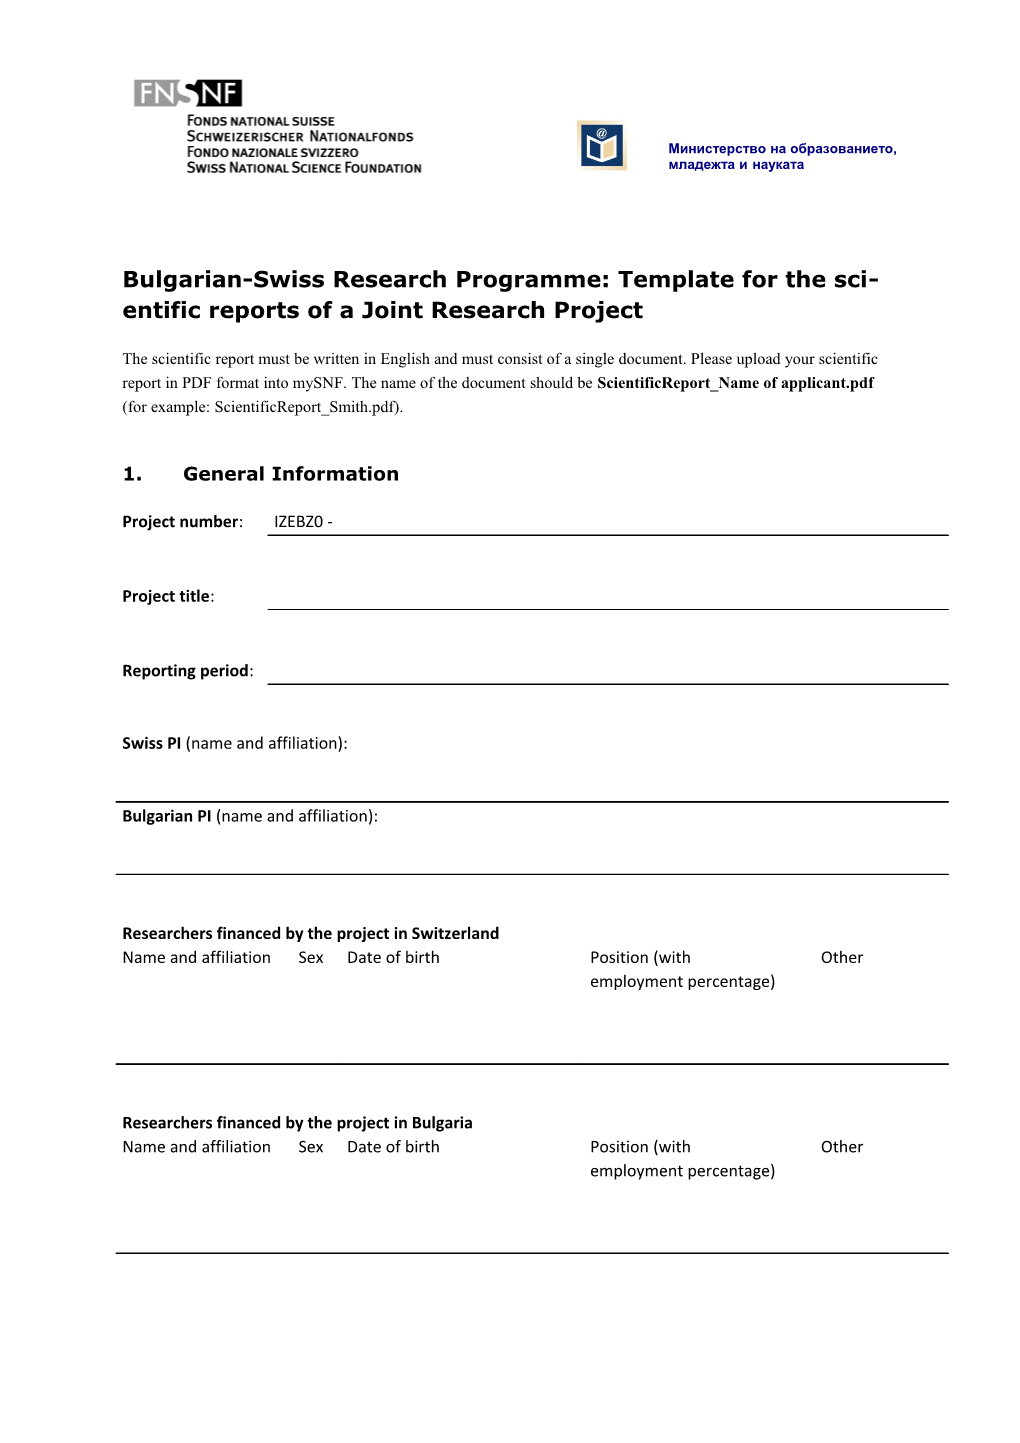 Bulgarian-Swiss Research Programme: Template for the Scientific Reports of a Joint Research